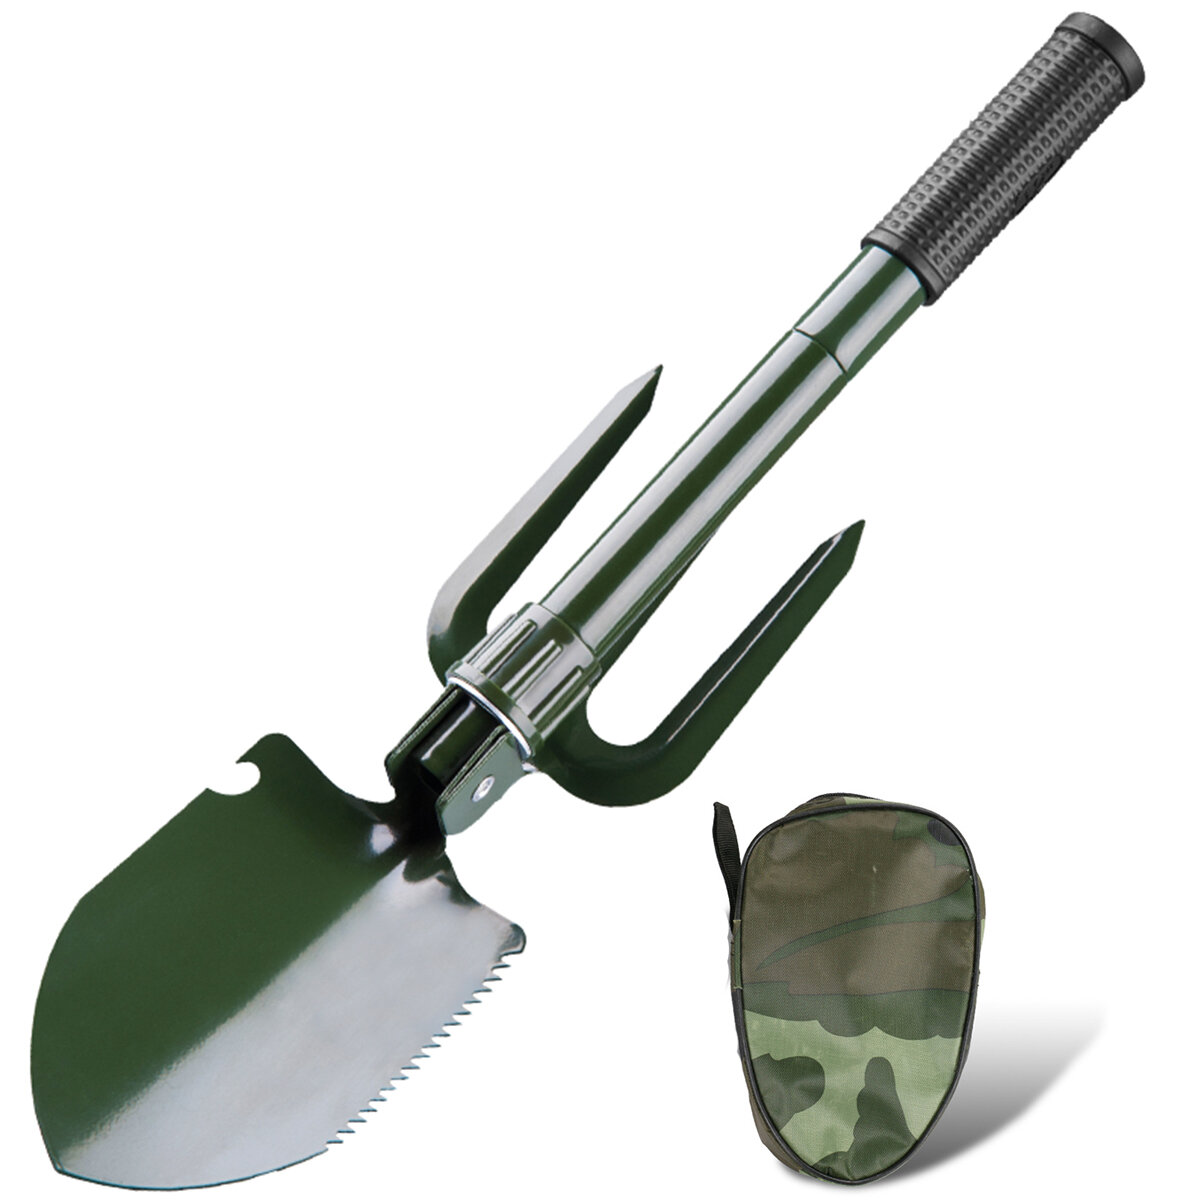 5-in-1 Tactical Folding Shovel Military Stainless Steel Folding Shovel Compact Tactical Emergency Survival Tools Outdoor Spade Trowel